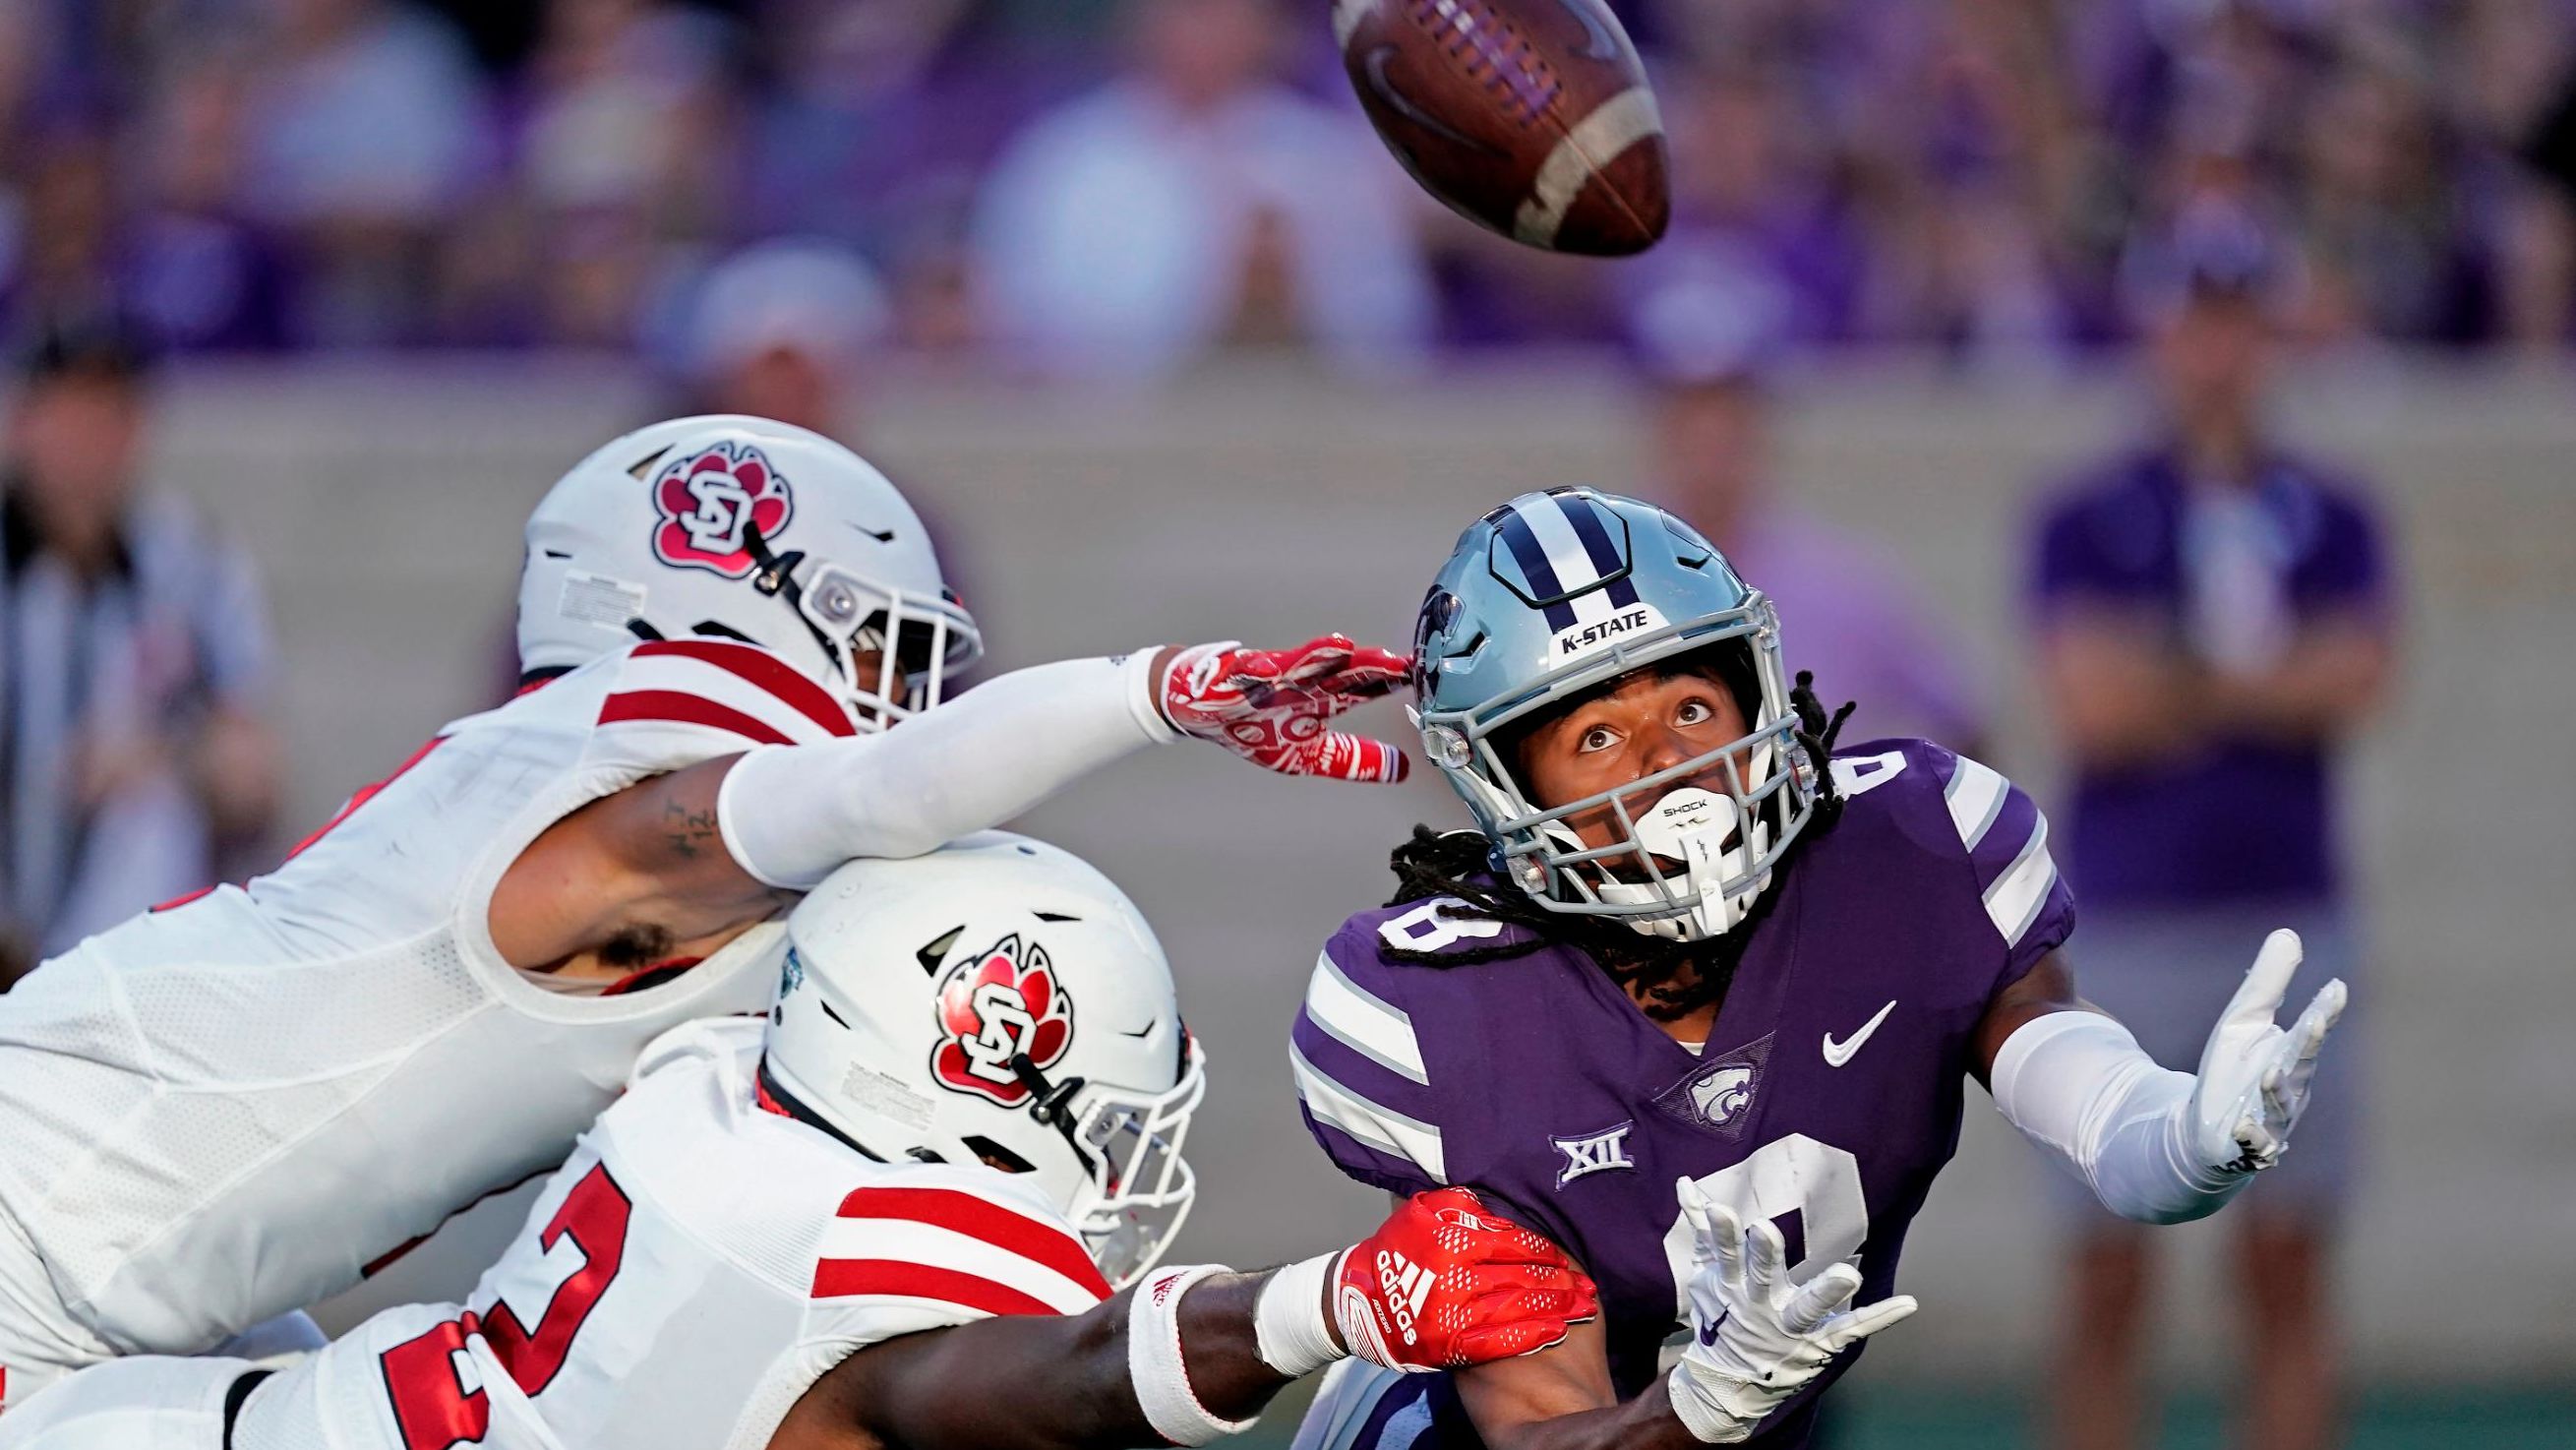 South Dakota players break up a pass intended for Kansas State wide receiver Phillip Brooks during a college football game in Manhattan, Kansas, on Saturday, September 3.